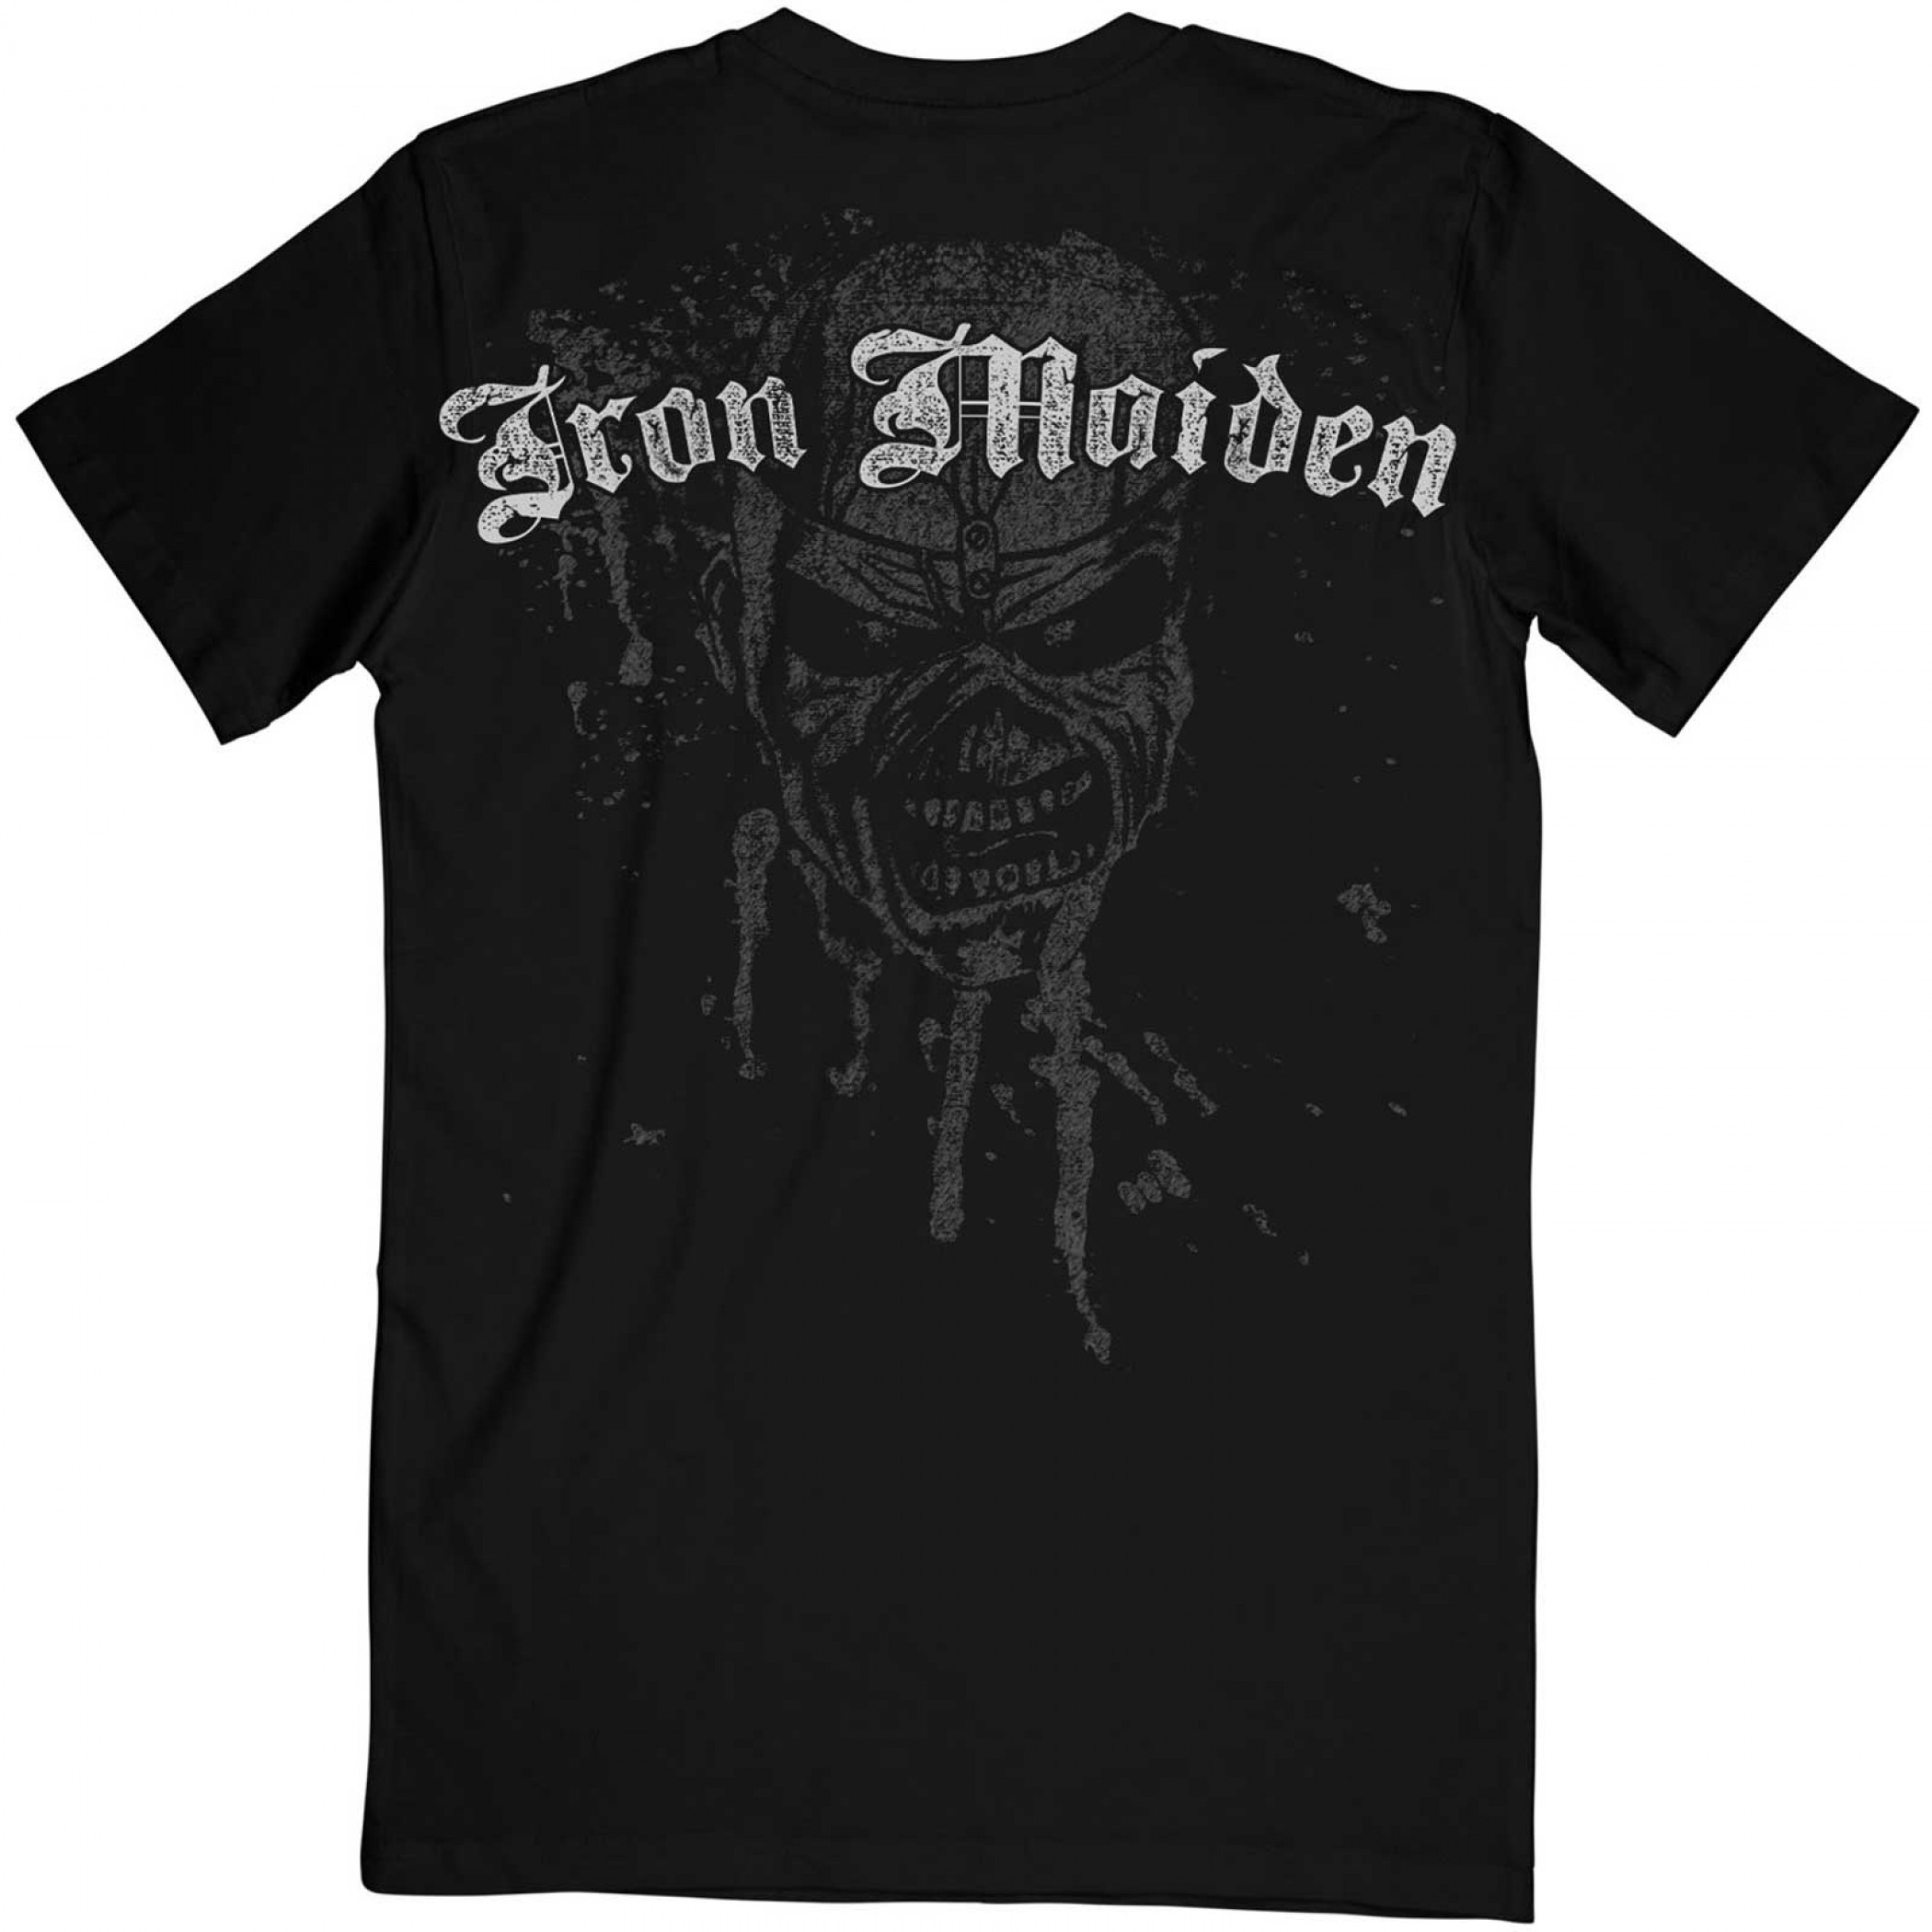 Iron Maiden The Trooper Front and Back Print T-Shirt